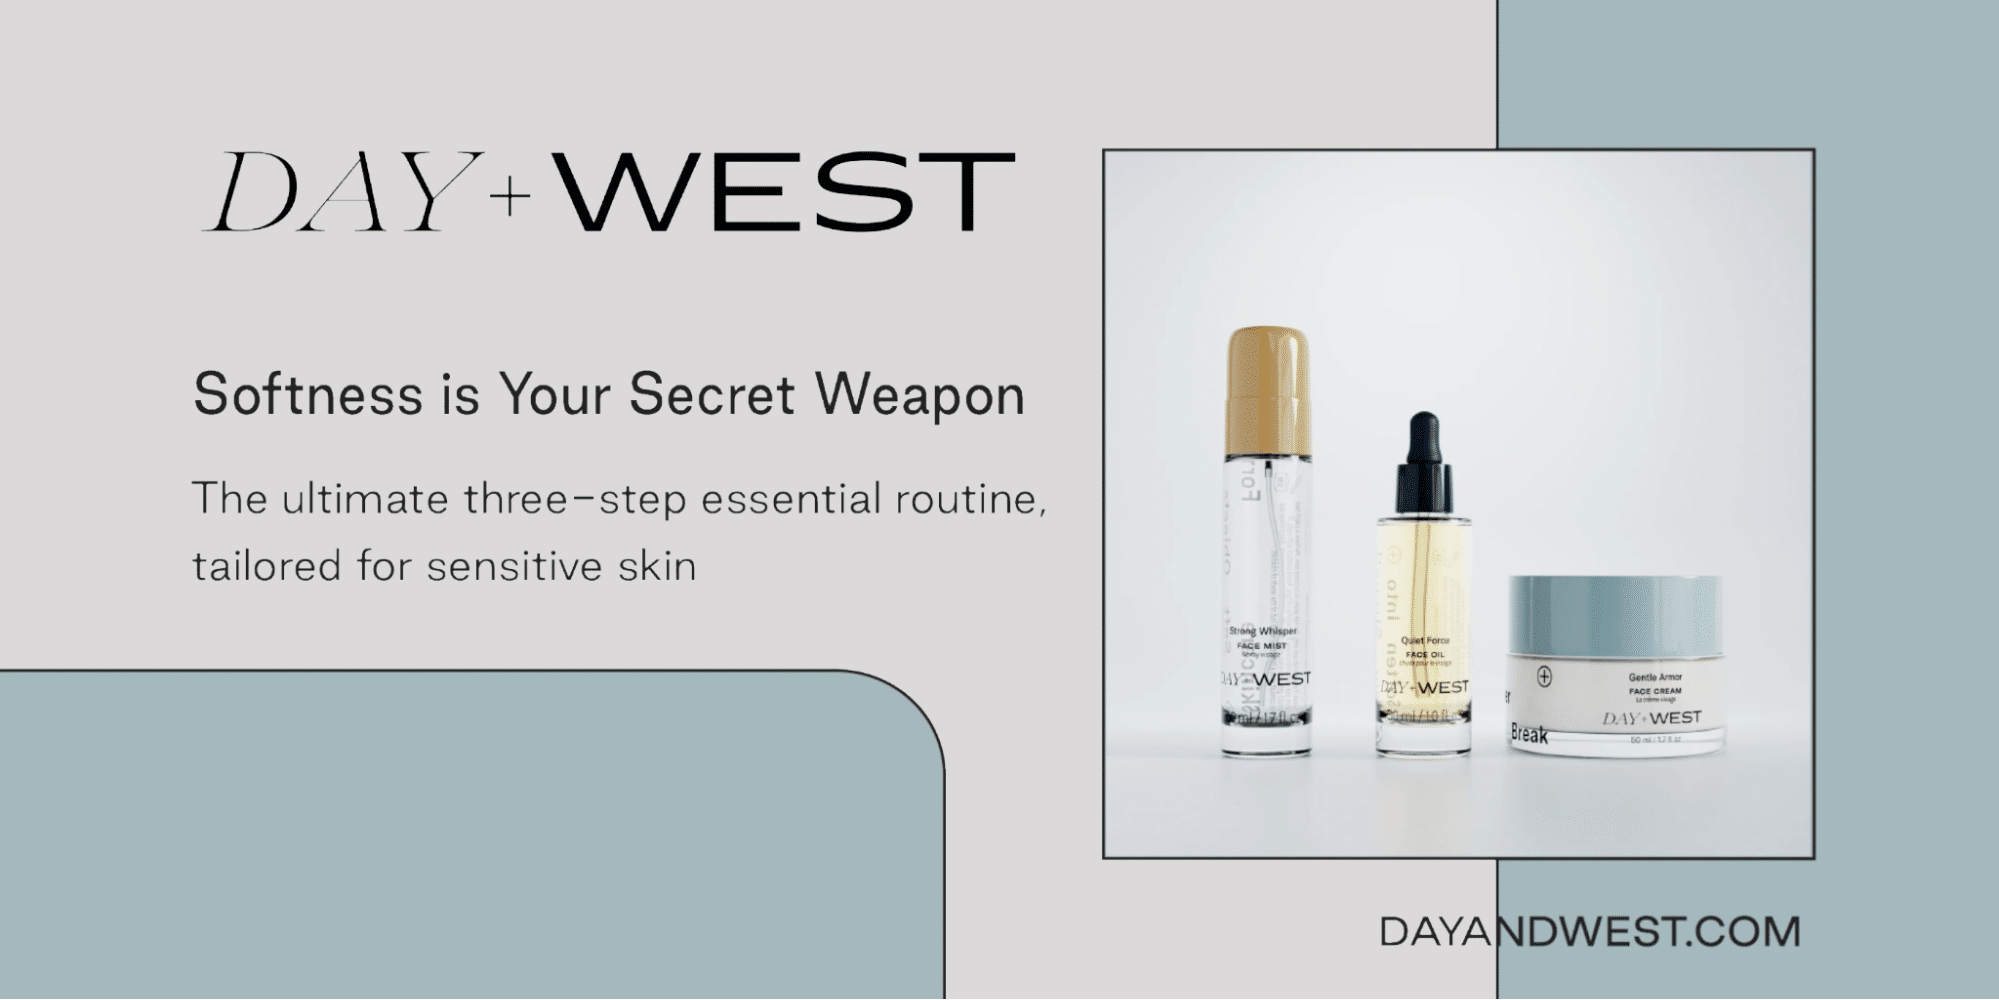 Glamming Up the Skincare Routine with Day+West: A Brand Focused on Wellness and Sustainability